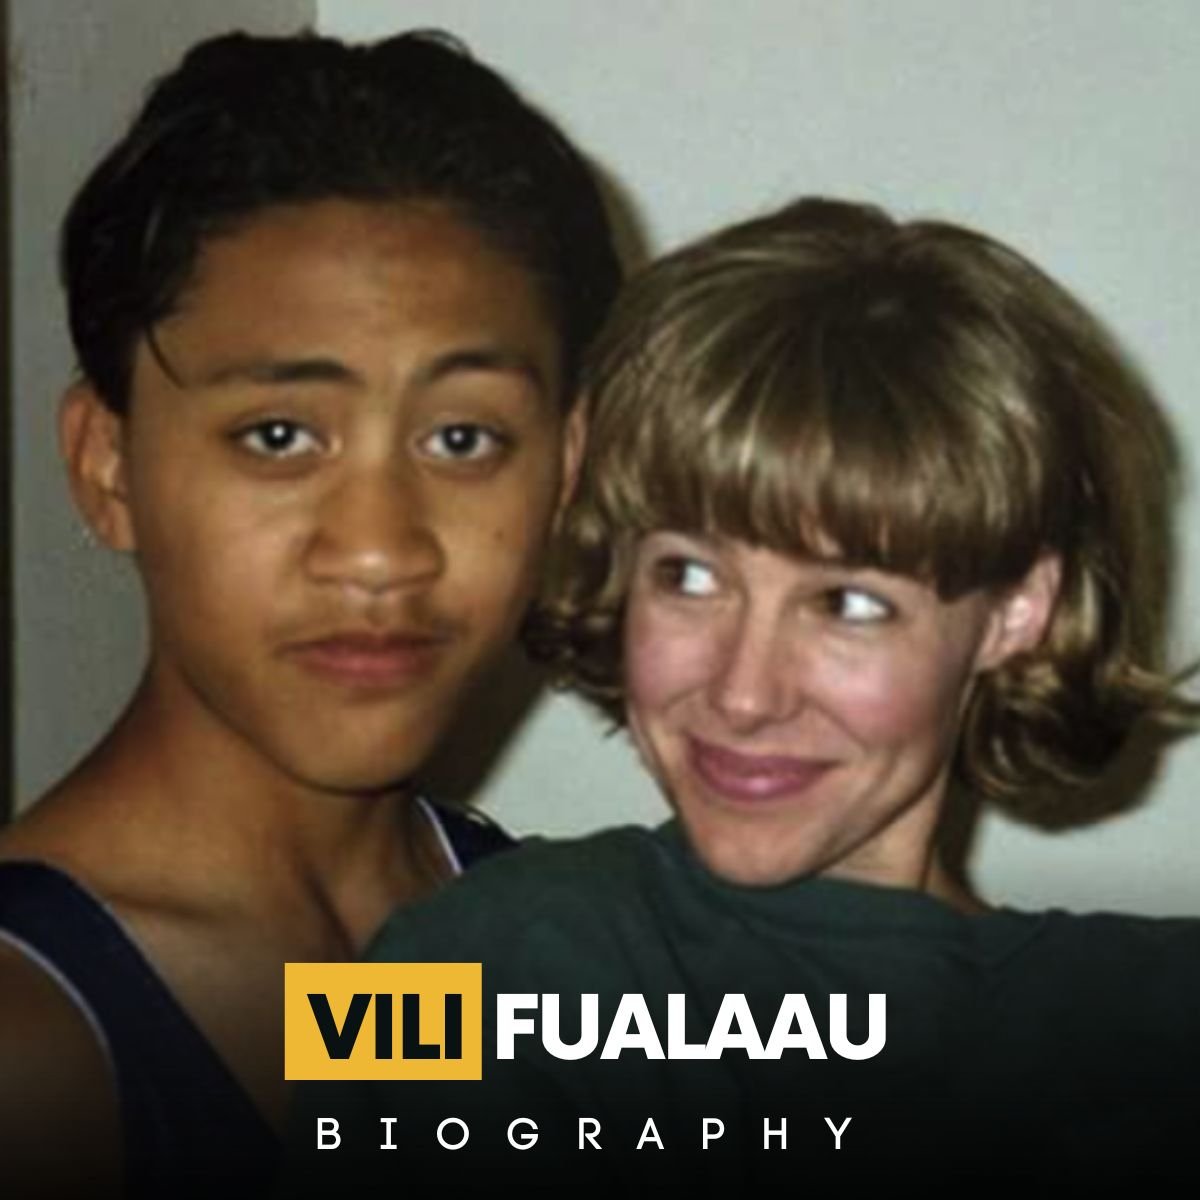 Vili Fualaau: From Fatherhood at 14 to Controversial Romance with Mary Kay Letourneau